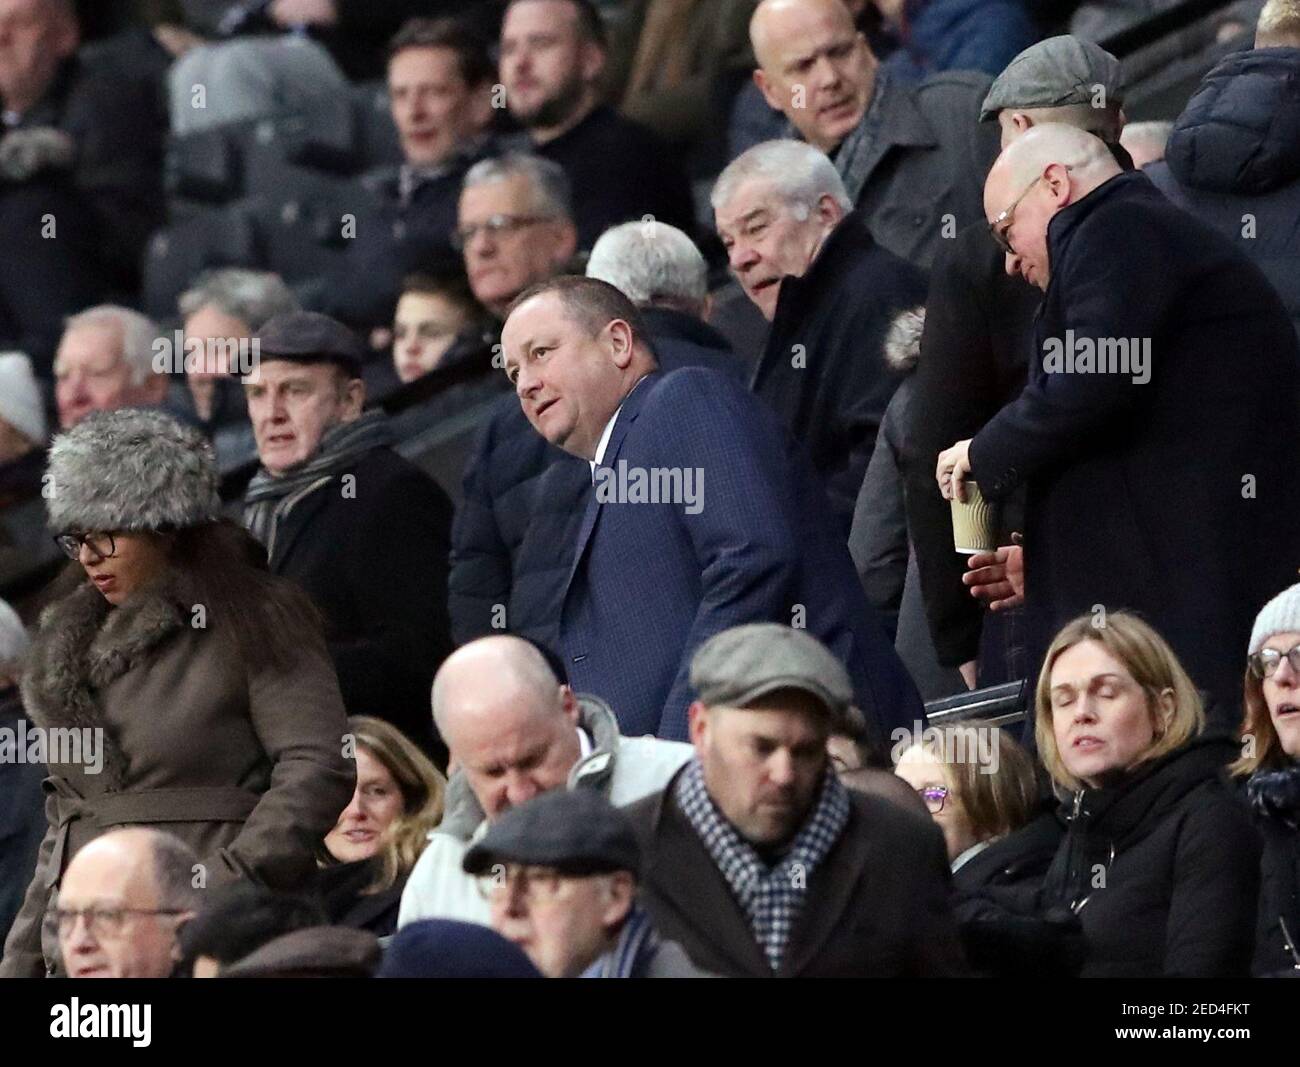 Soccer Football - FA Cup Third Round Replay - Newcastle United v Rochdale - St James' Park, Newcastle, Britain - January 14, 2020  Newcastle United owner Mike Ashley and managing director Lee Charnley in the stands       REUTERS/Scott Heppell Stock Photo